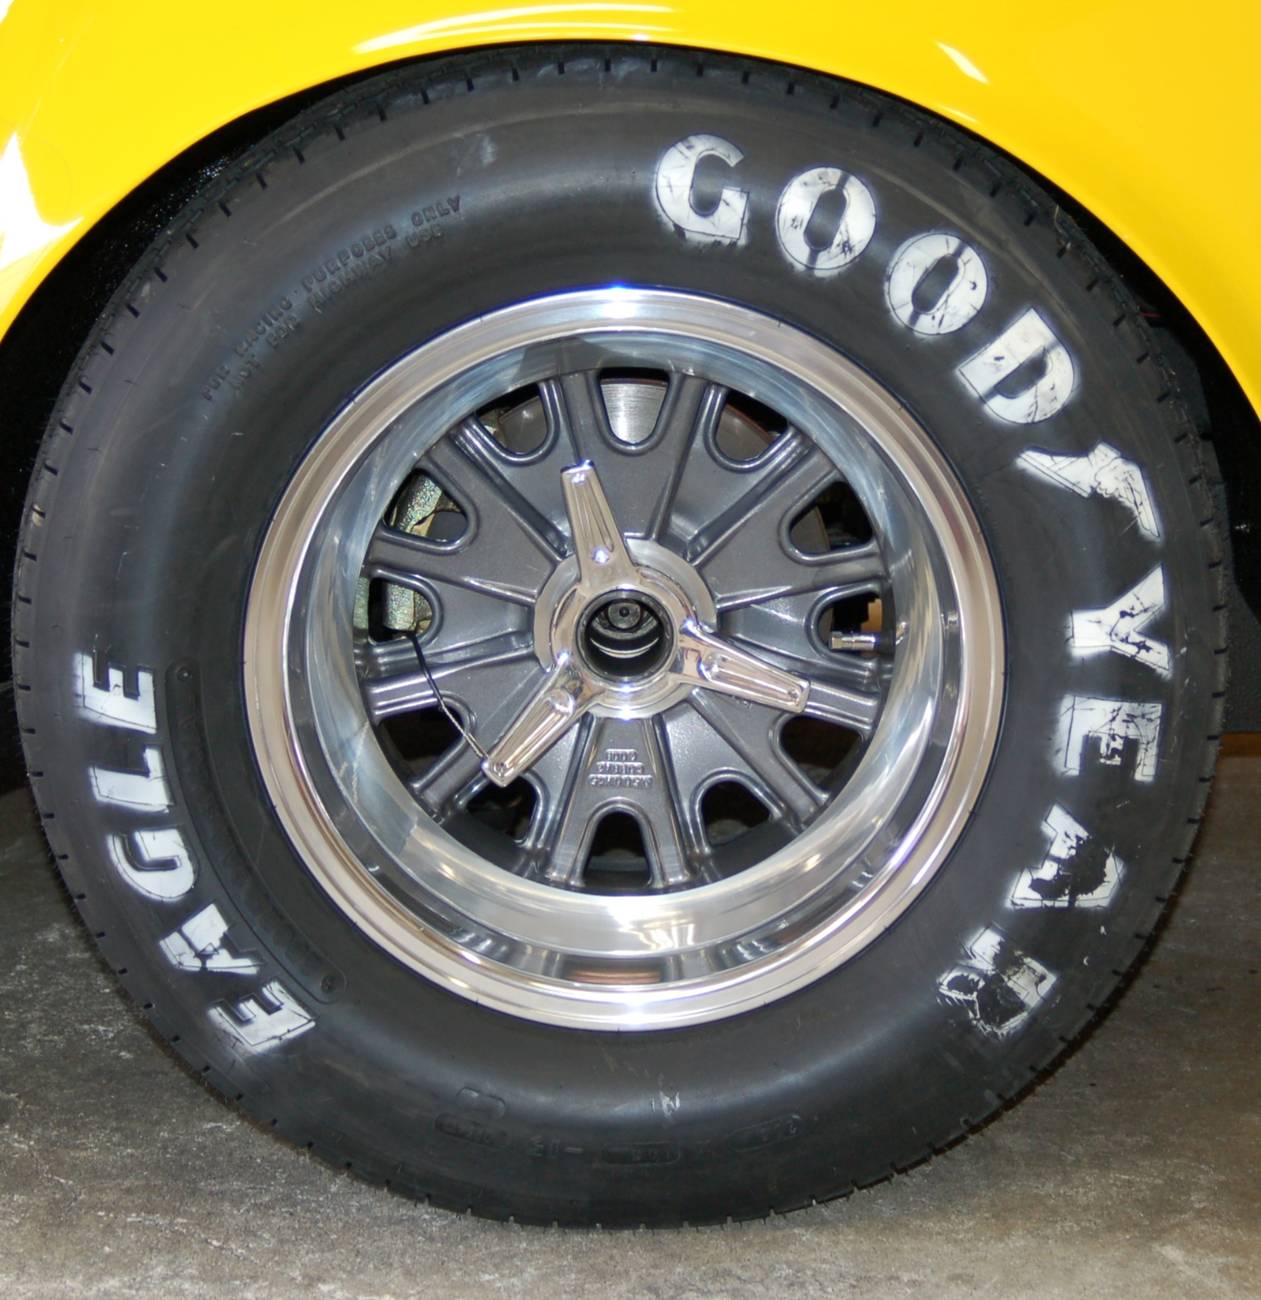 Any good tire lettering paint?